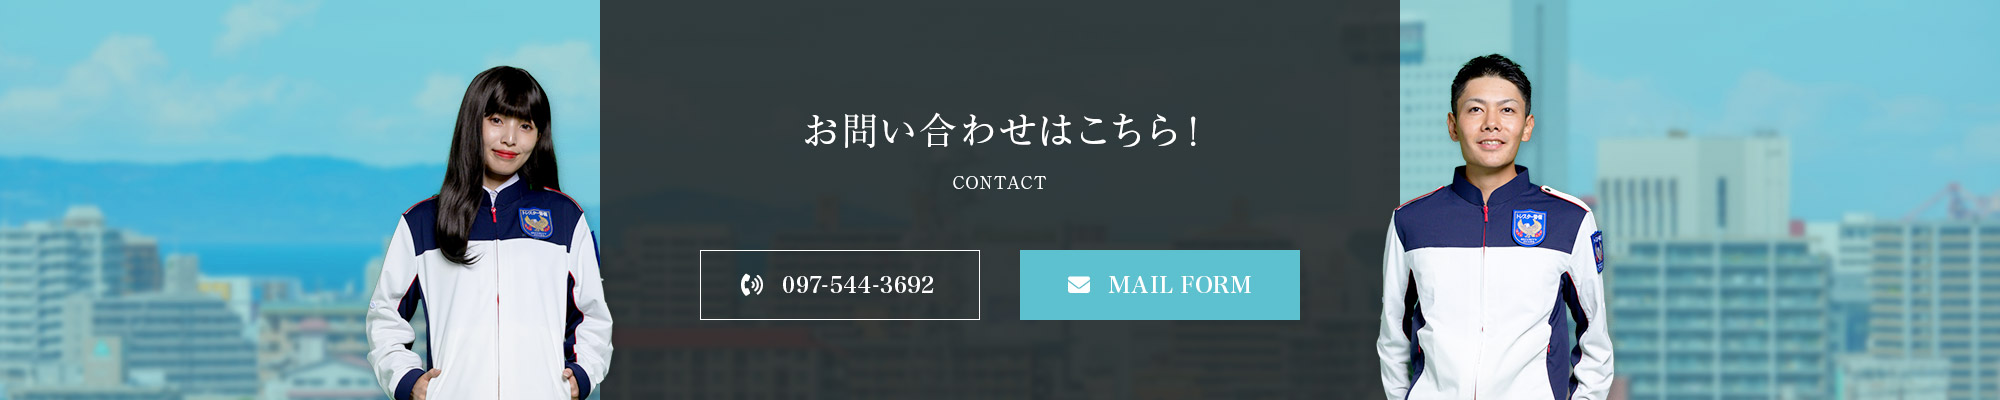 bnr_contact_feature_off